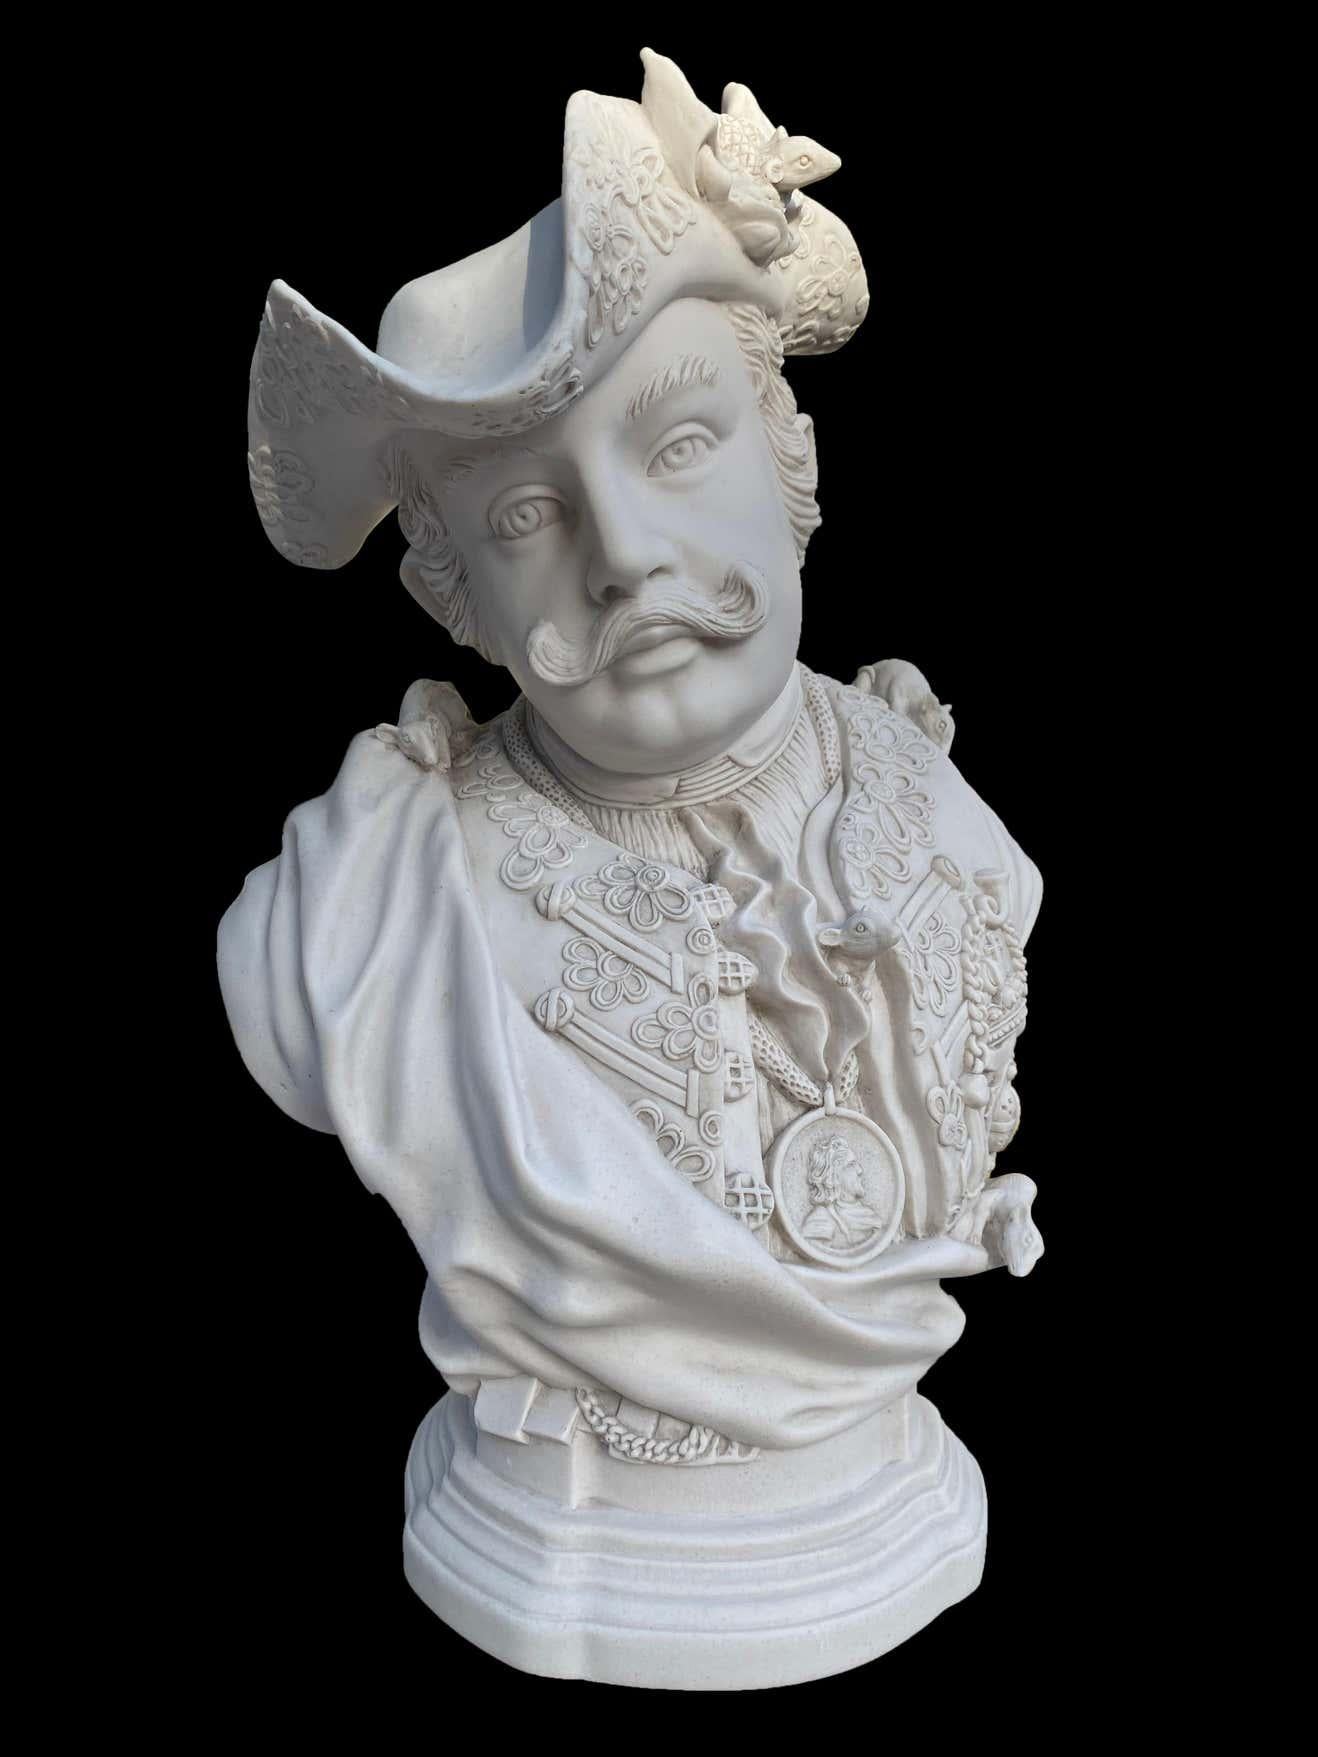 A stunning Baron Schmiedel bust sculpture, 20th century.

Made in 1739, this satirical portrait bust of the court jester Johann Gottfried Tuscheer known as Baron Schmiedel, was one of the last Royal commissions for the Japanese Palace of Augustus